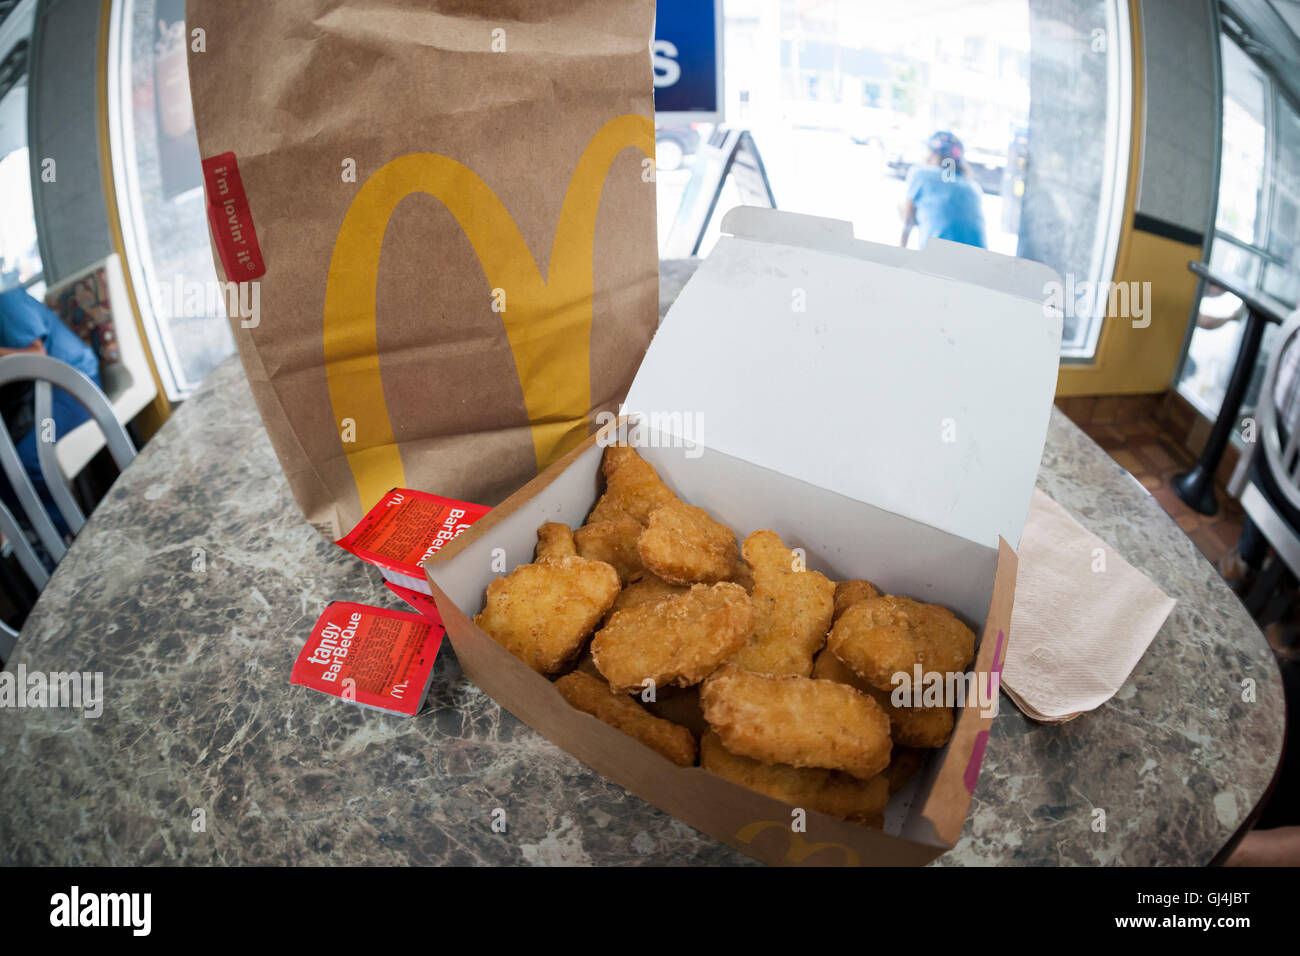 An order of McDonald's Chicken McNuggets in a McDonald's restaurant in New York on Monday, August 1, 2016. McDonald's announced that it has dropped the artificial preservative used in McNuggets cooking oil and and they have removed much of the artificial ingredients contained in the McNuggets. The company also has stopped the use of chickens raised with antibiotics and will remove high fructose corn syrup from its buns, replacing it with sugar.  (© Richard B. Levine) Stock Photo